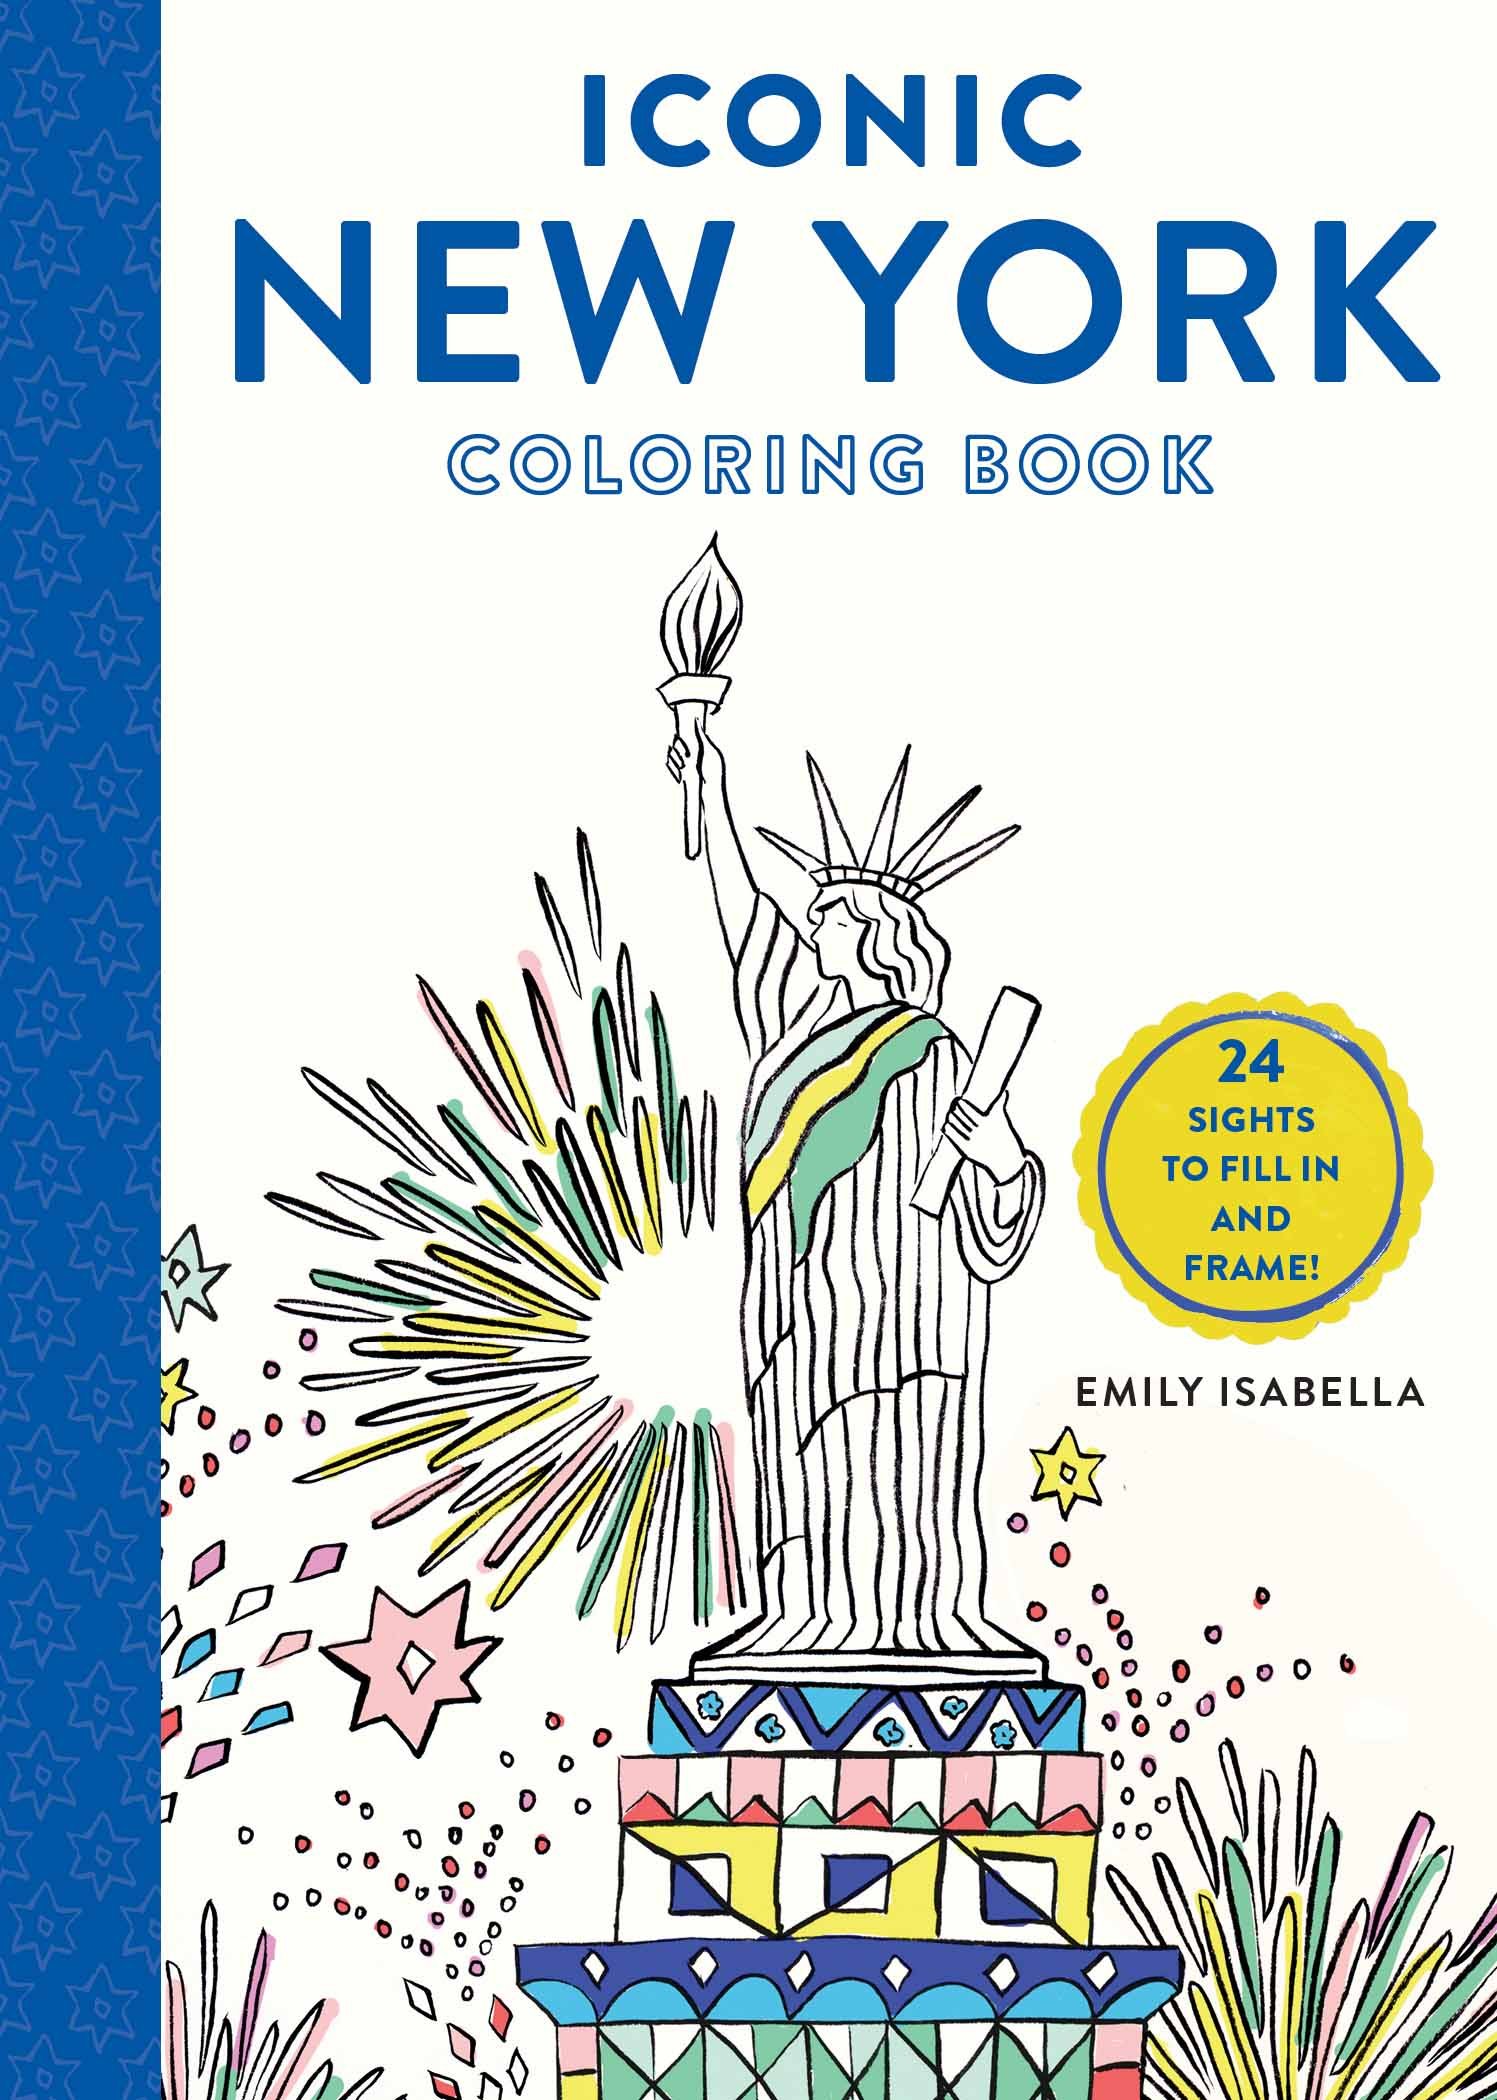 Iconic New York Coloring Book: 24 Sights to Fill In and Frame (Iconic Coloring Books)